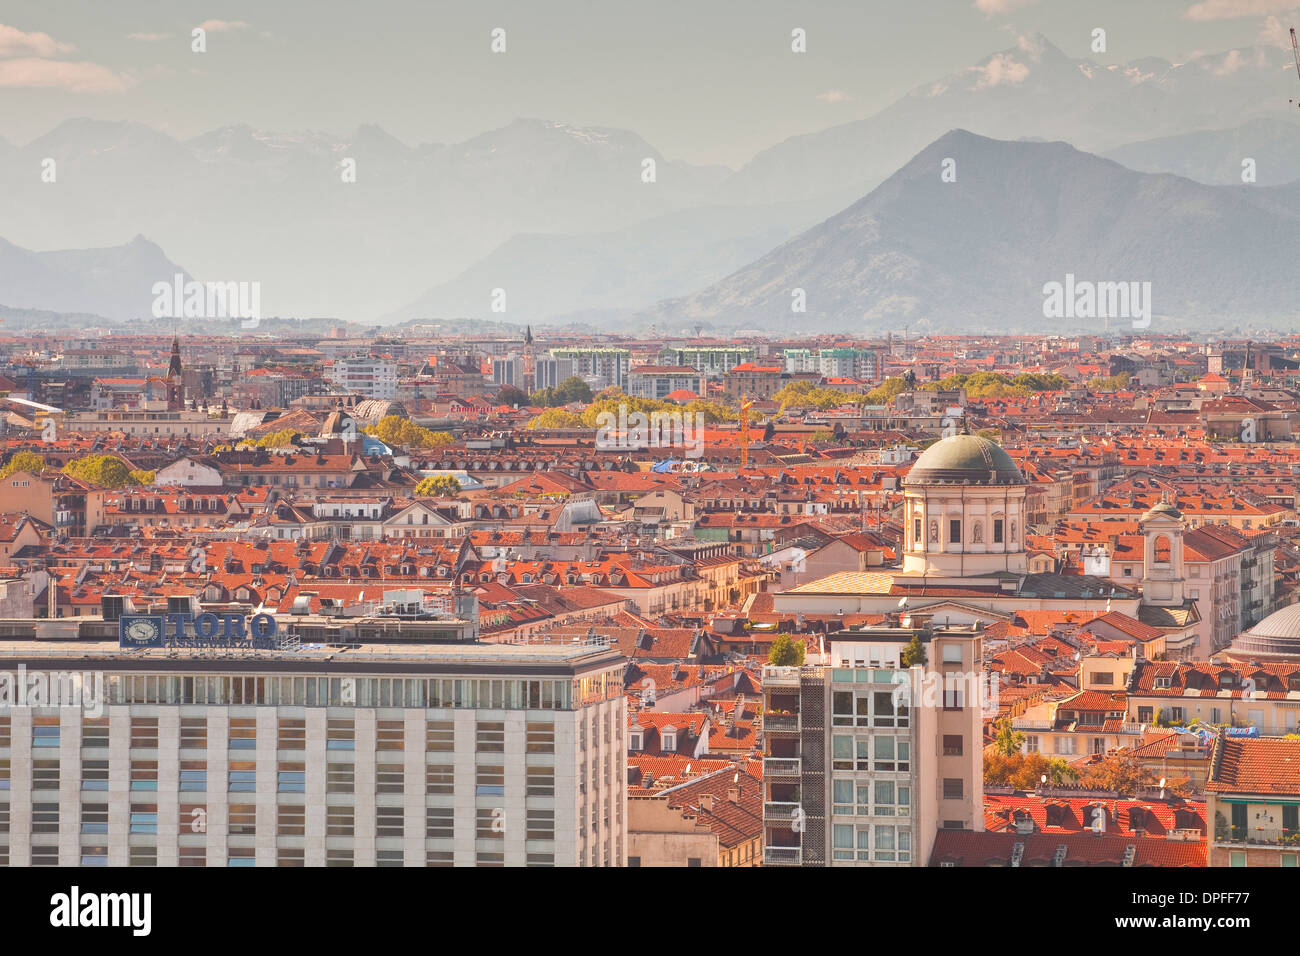 The city of Turin with the Italian Alps looming in the background, Turin, Piedmont, Italy, Europe Stock Photo